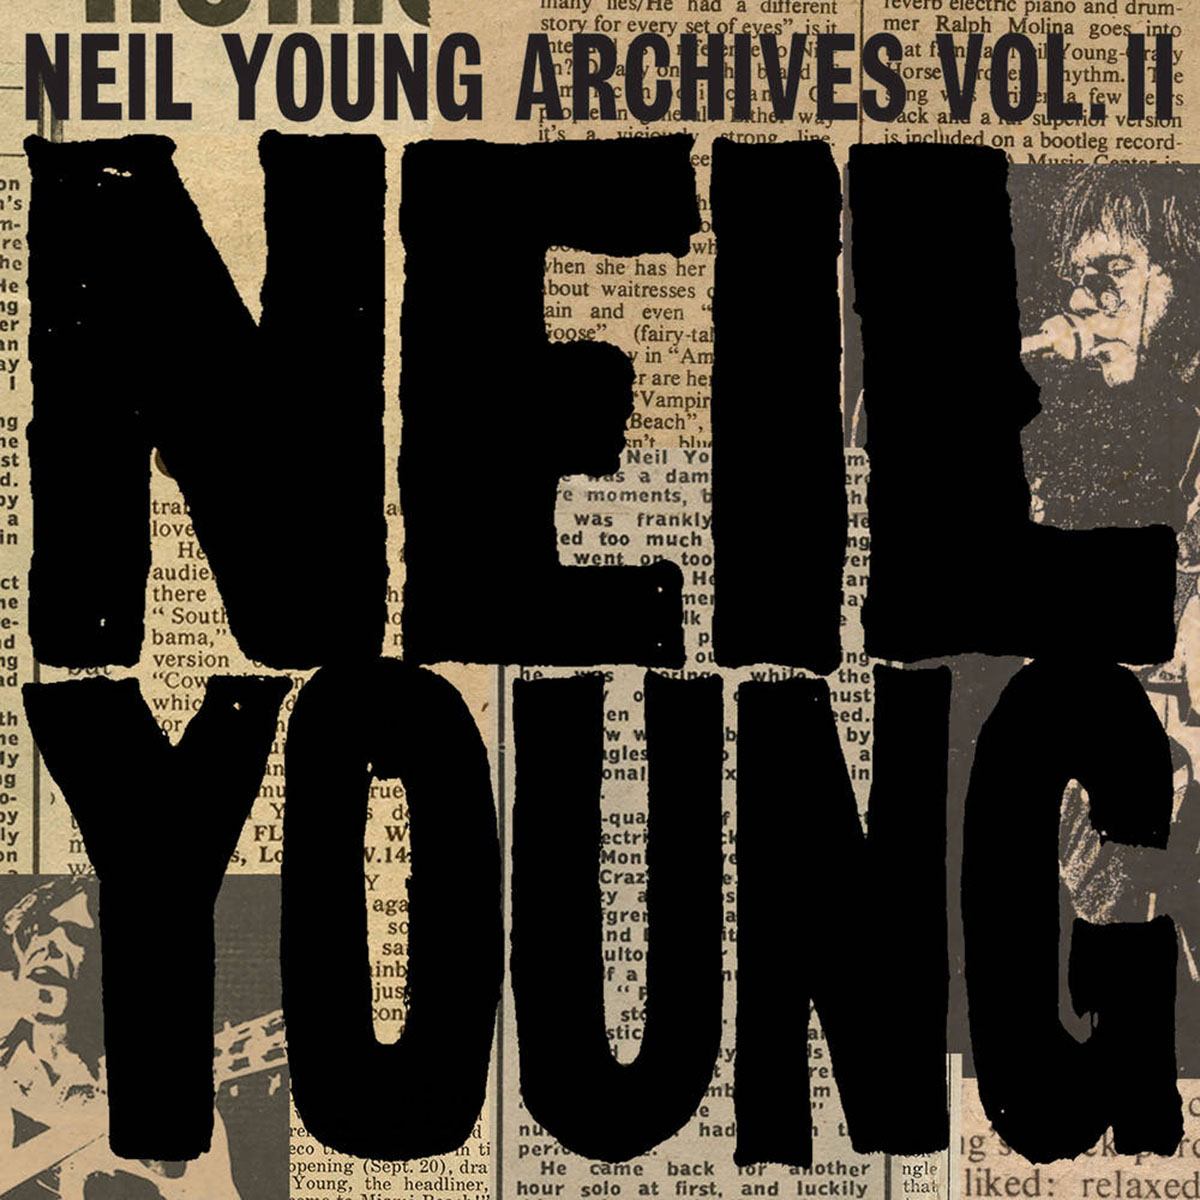 Neil Young - Archives Volume II (1972-1976)